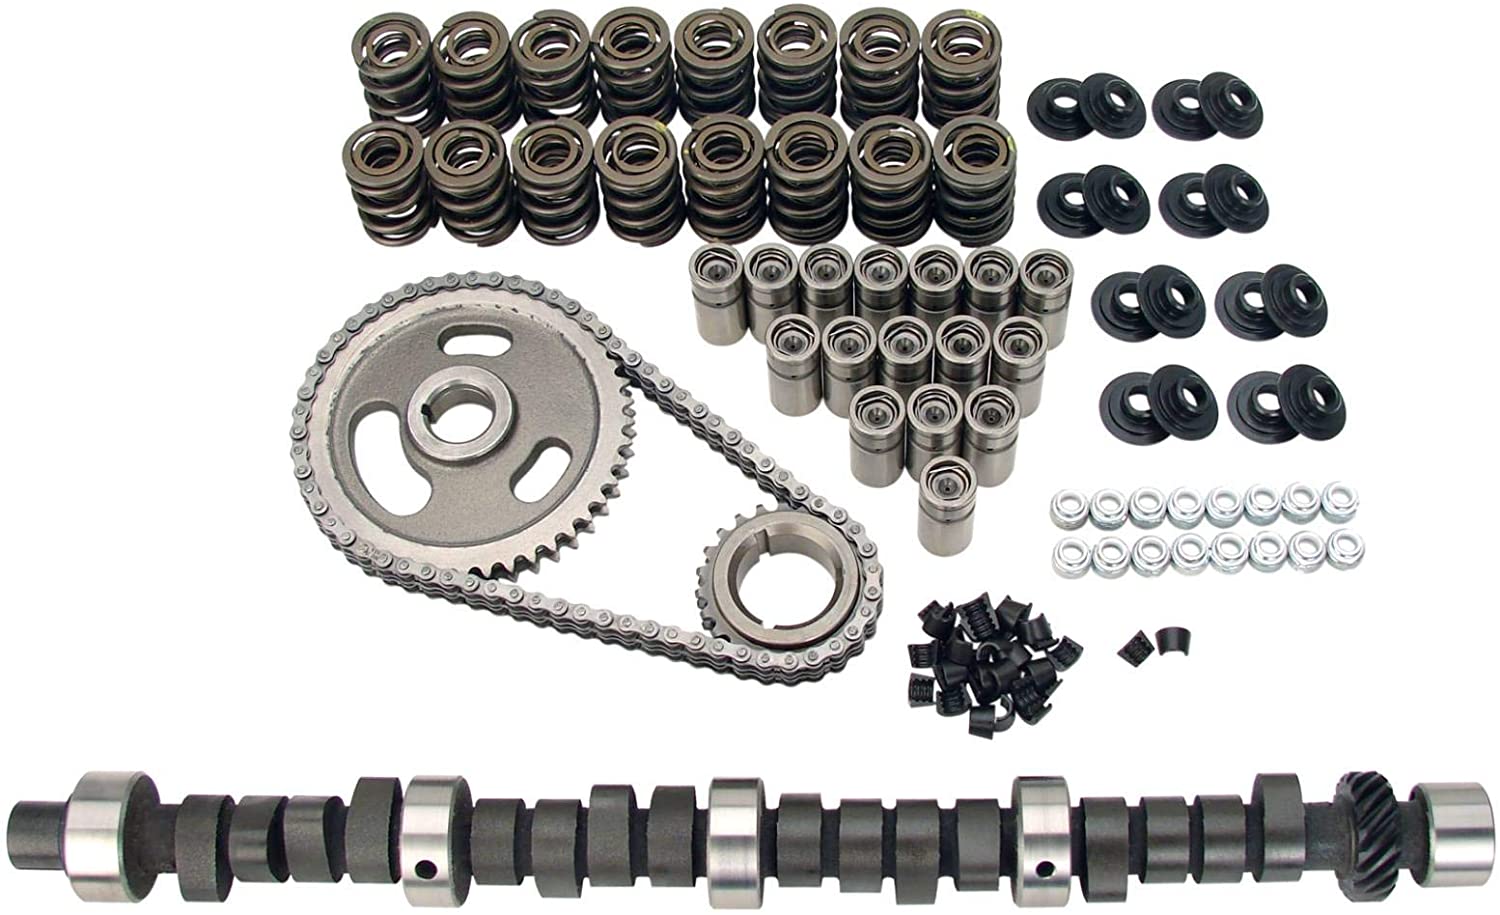 COMP Cams CL20-600-4 Thumpr 227/241 Hydraulic Flat Cam and Lifter Kit for Chrysler 273-360